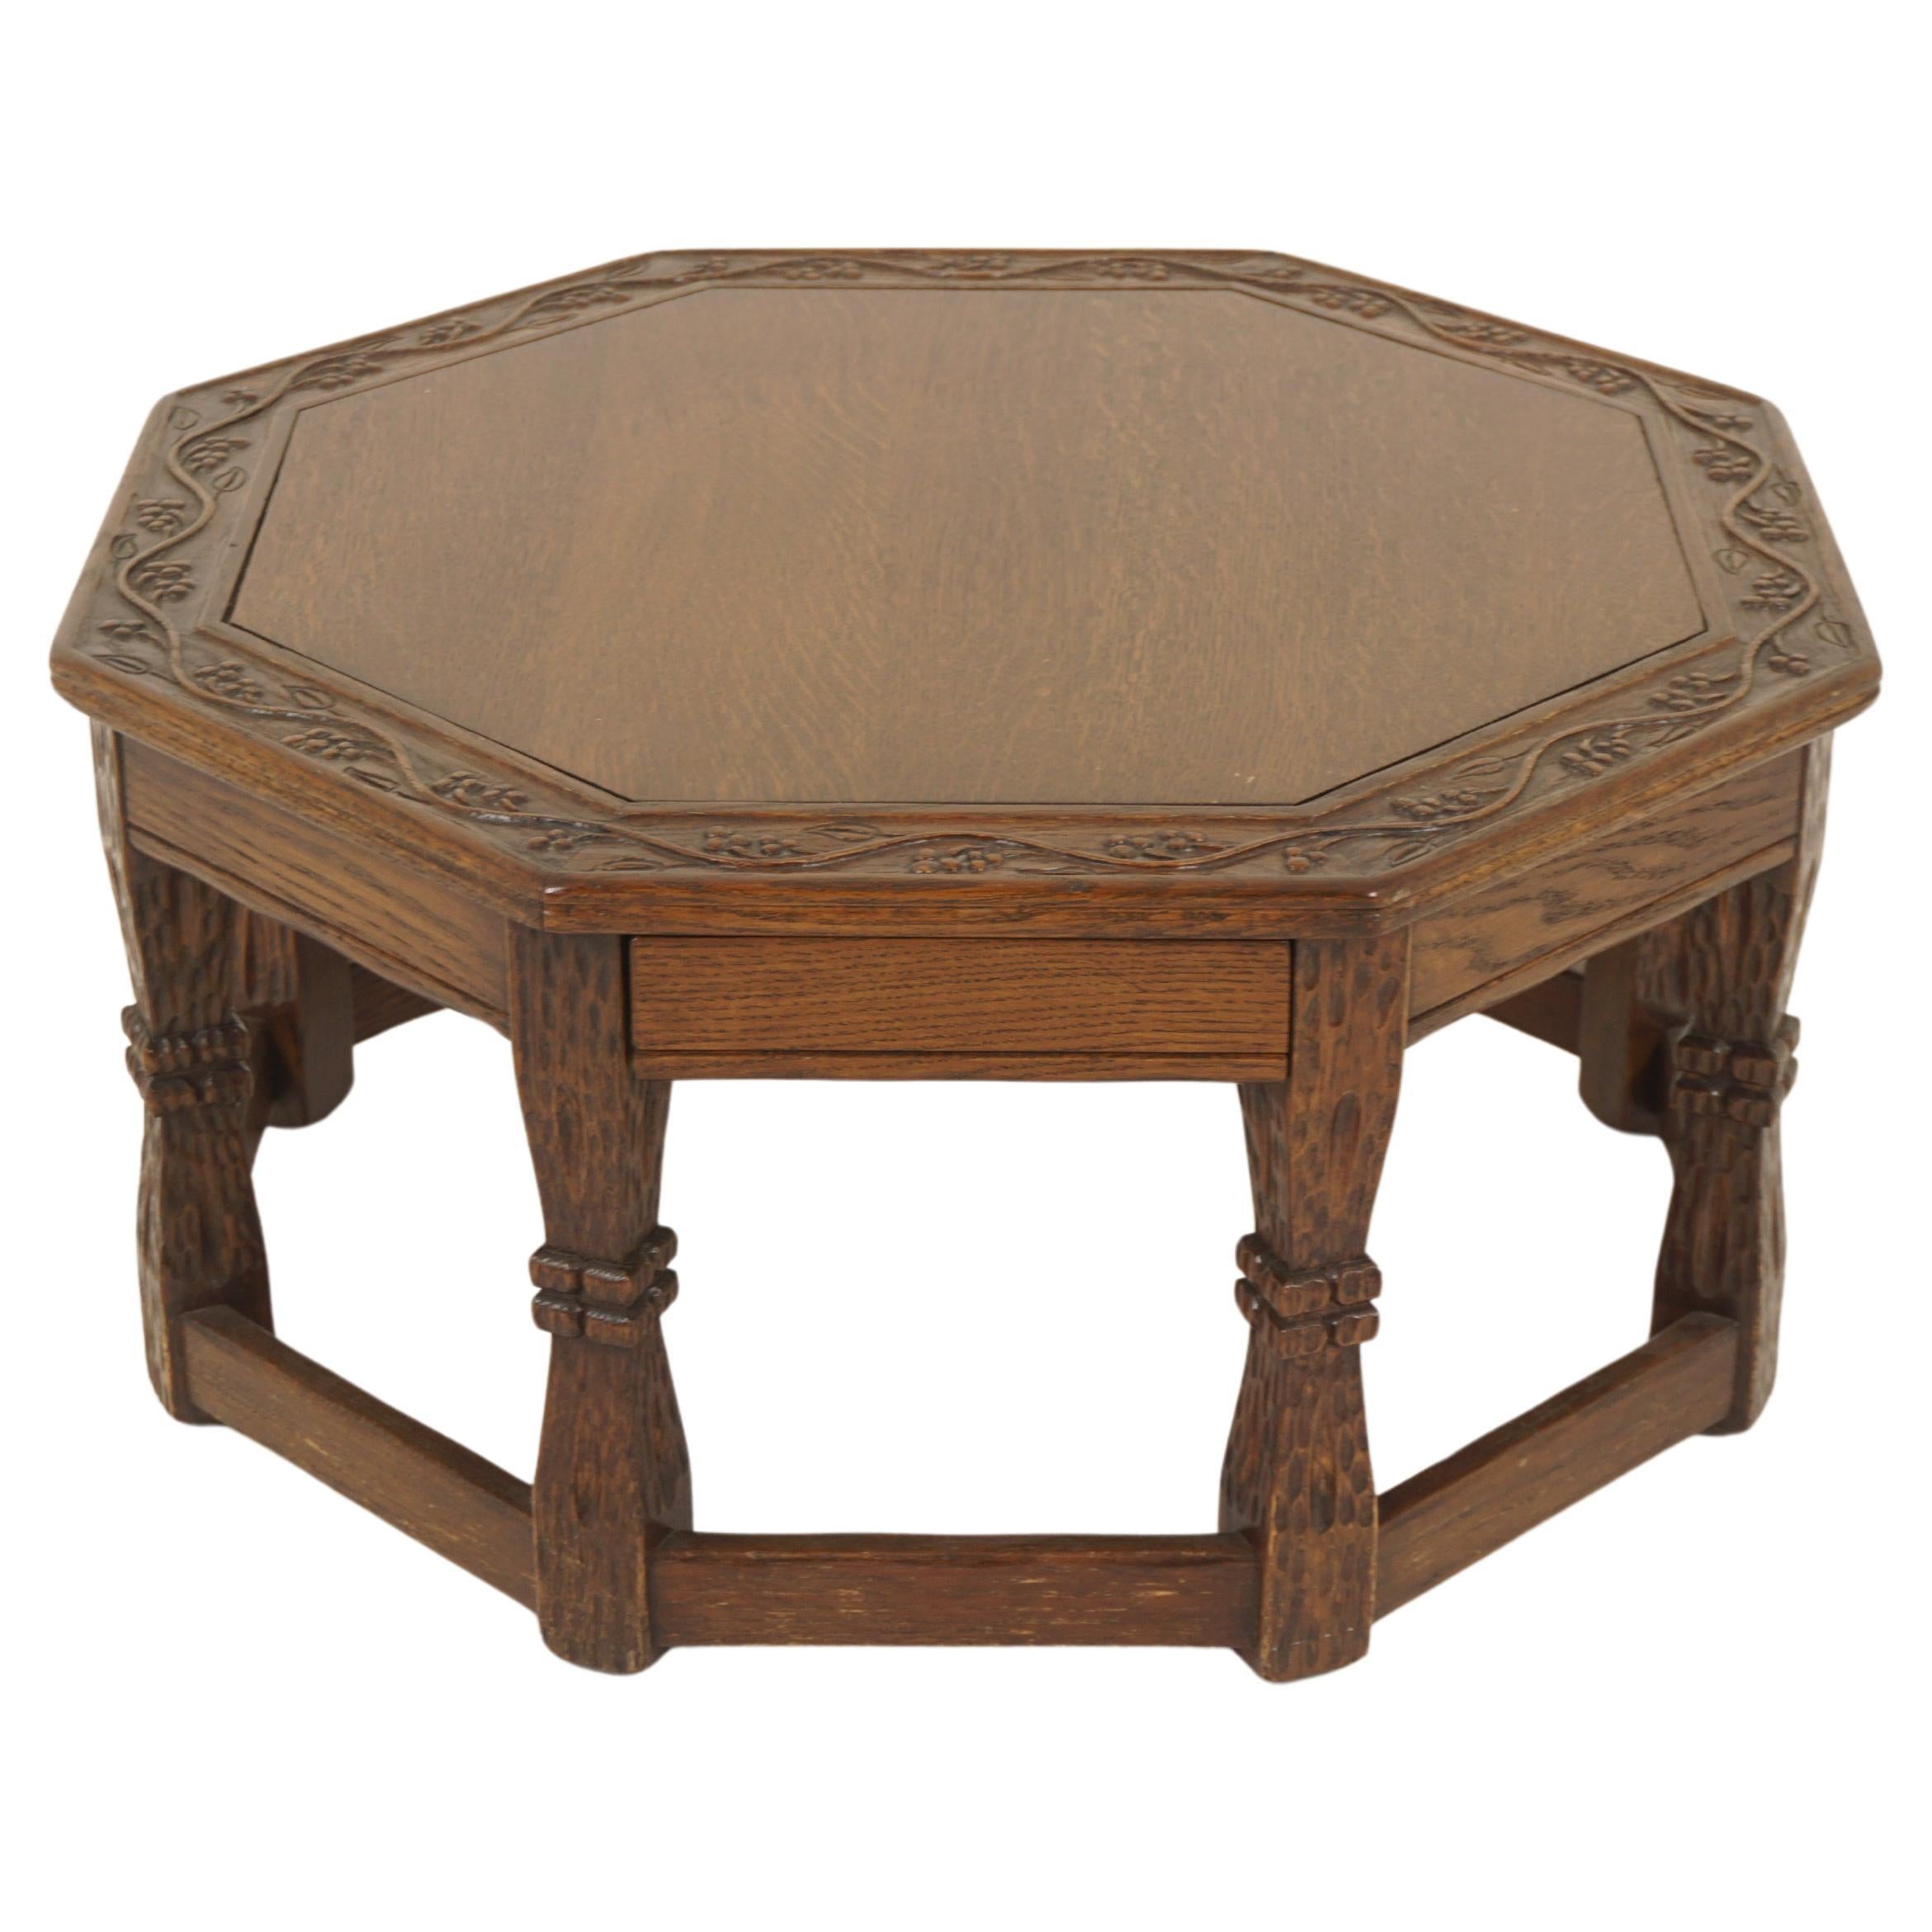 Vintage Carved Oak Octagonal Coffee Table With Drawer, American 1950, H1196 For Sale